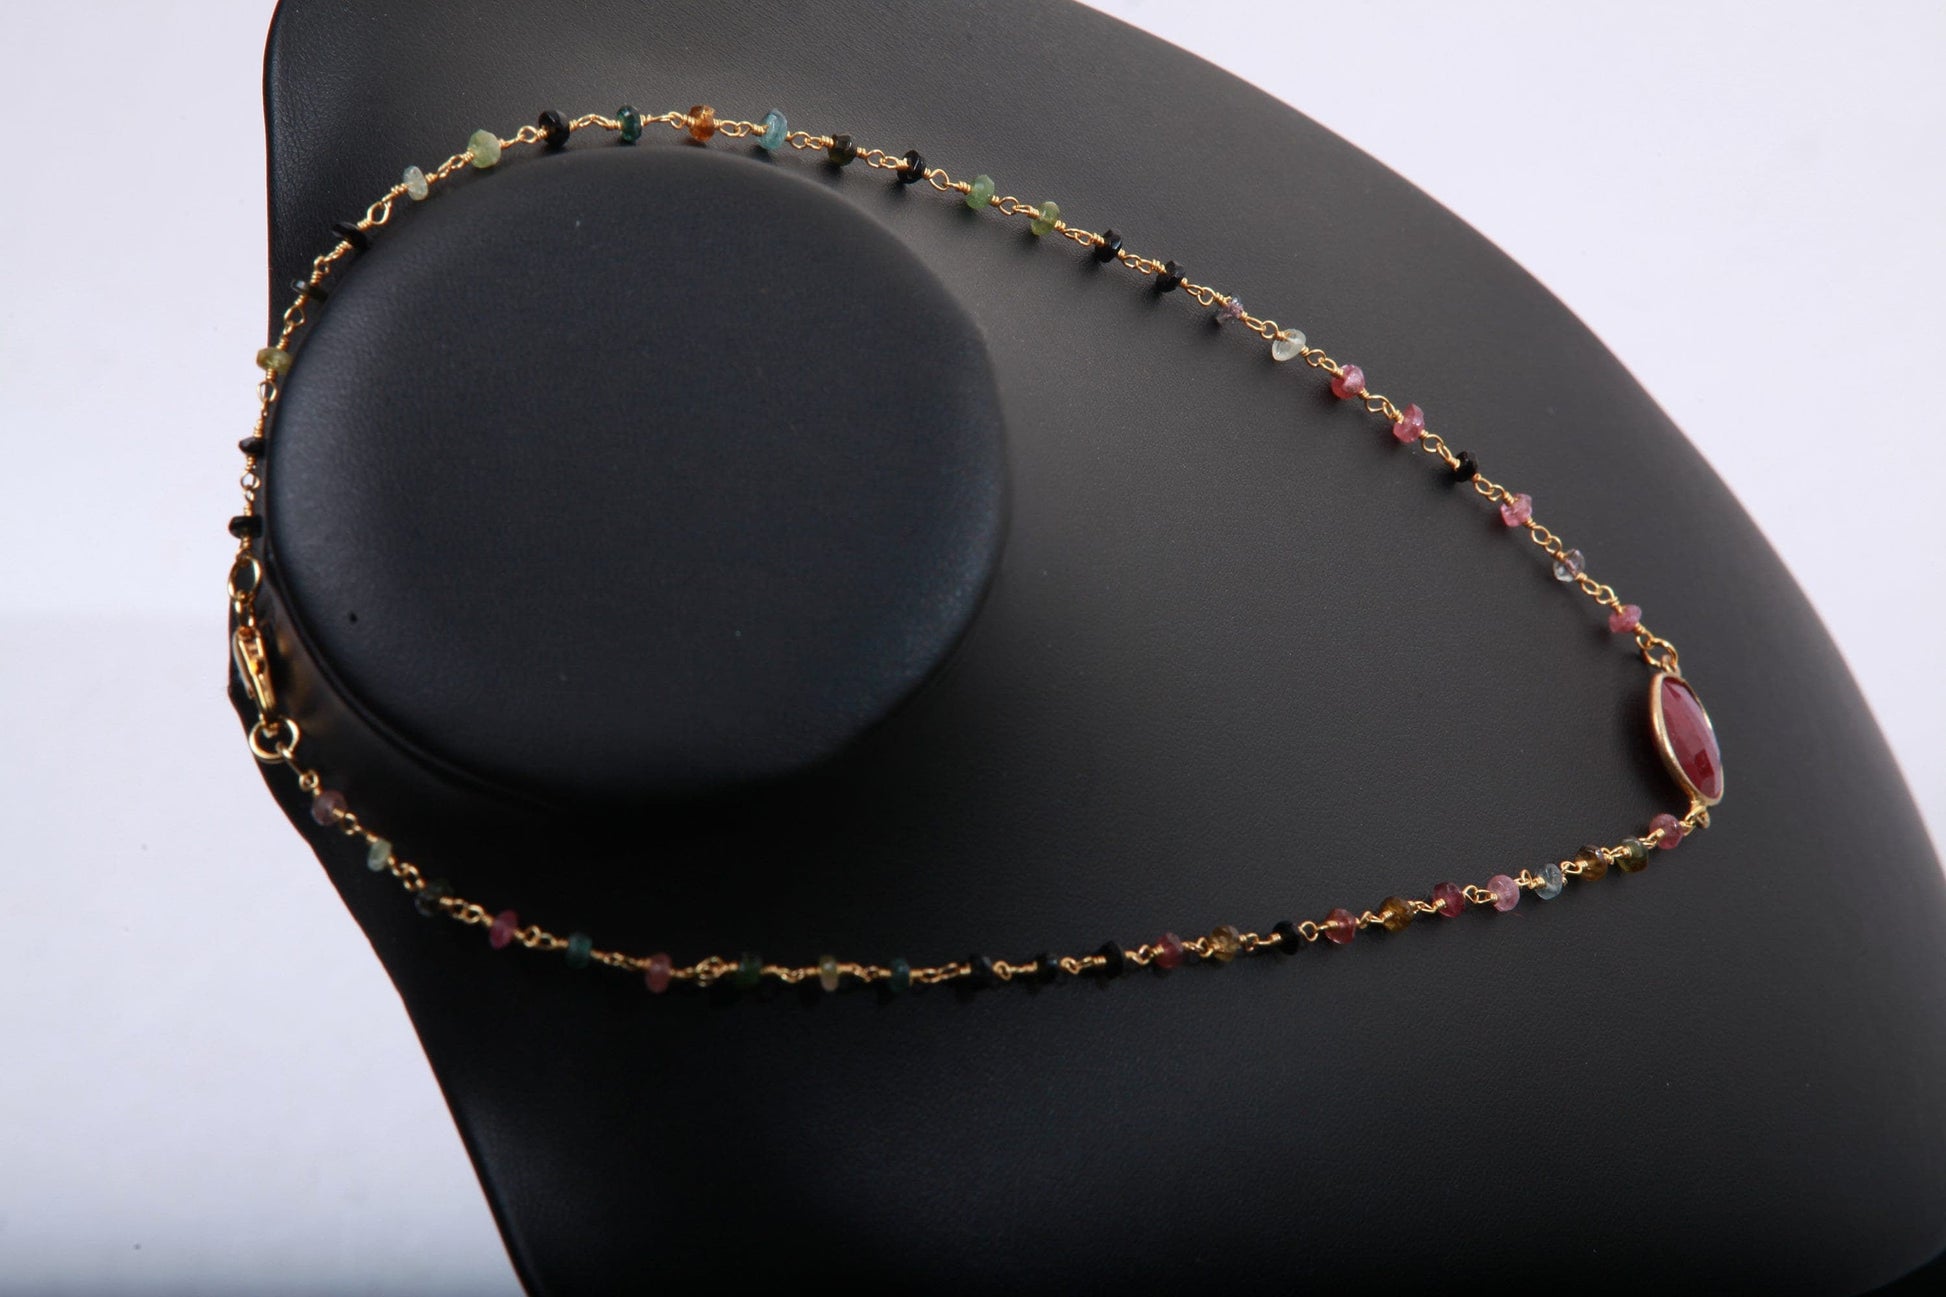 Genuine Ruby Faceted Free Form Oval Gold Vermeil Bezel with Stunning Tourmaline Beaded Rosary Chain 16&quot; Necklace, Girlfriend Gift.